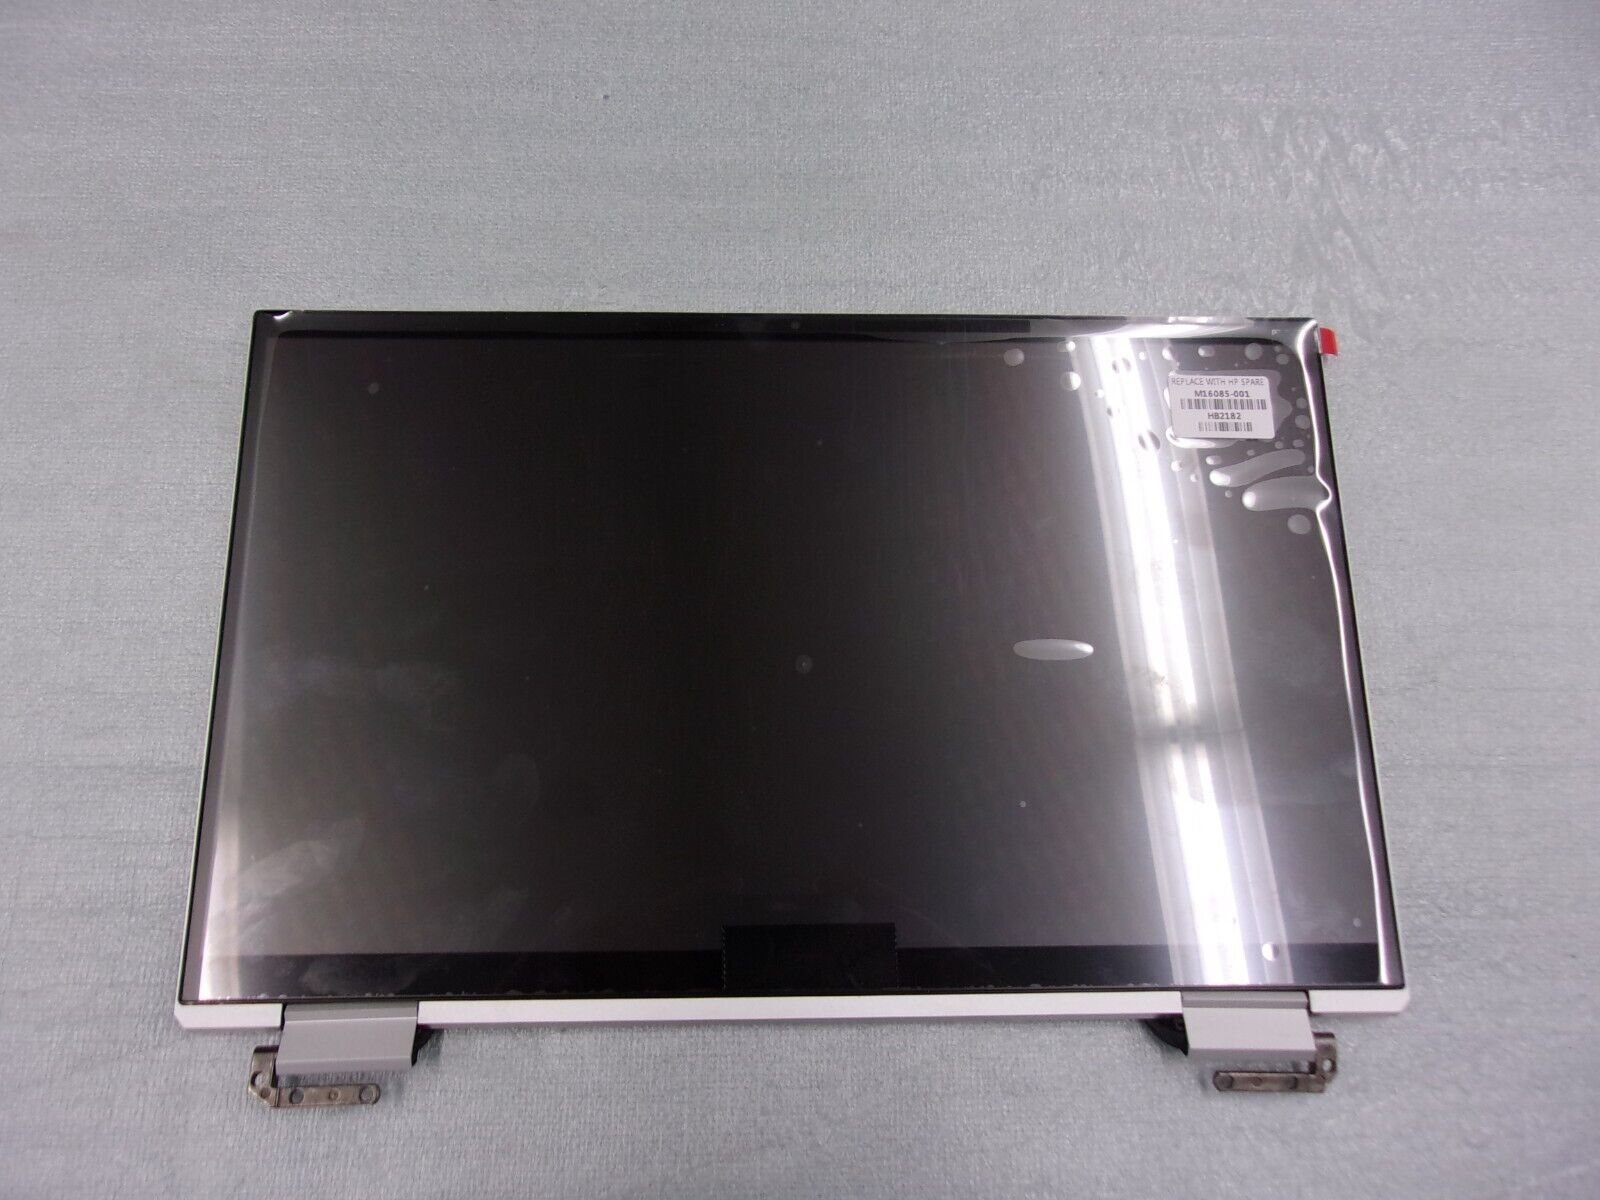 M16085-001 LCD Screen Multi-Touch Screen Full Assembly **NOT IN MANUFACTURER BOX